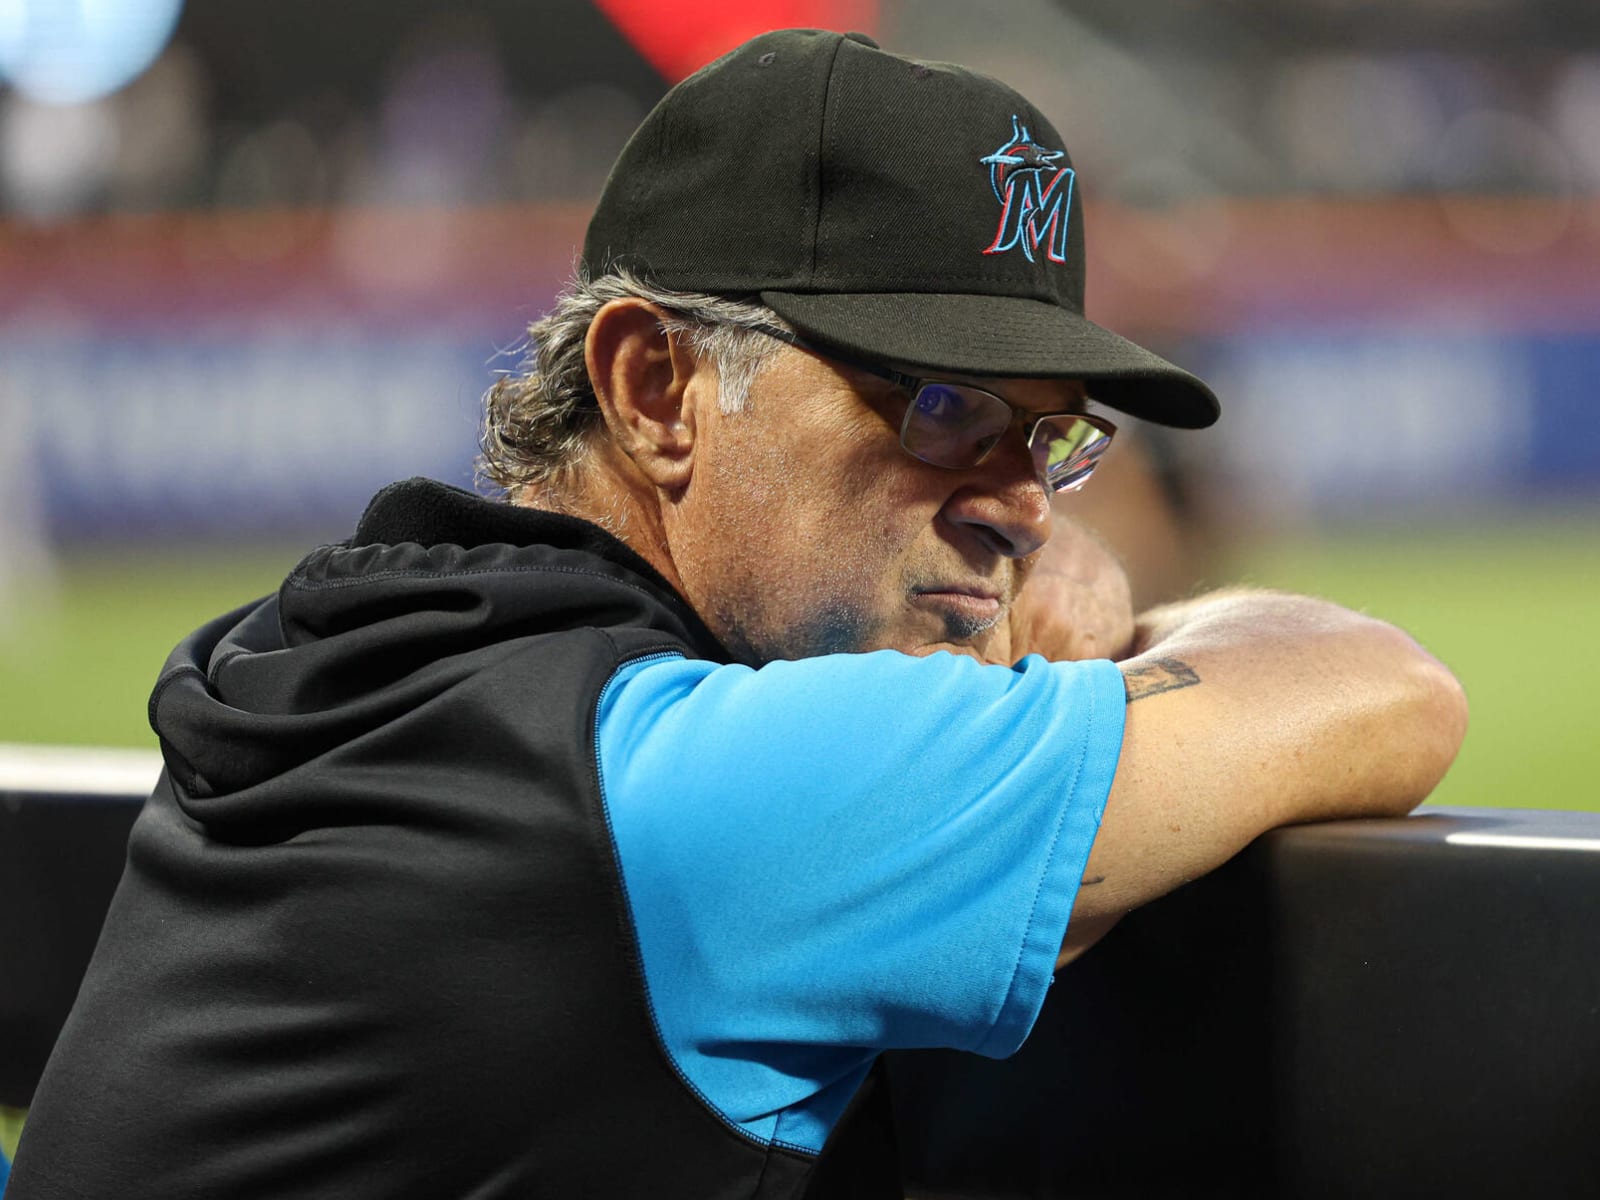 Manager Don Mattingly has to be decisive in Miami while sale of